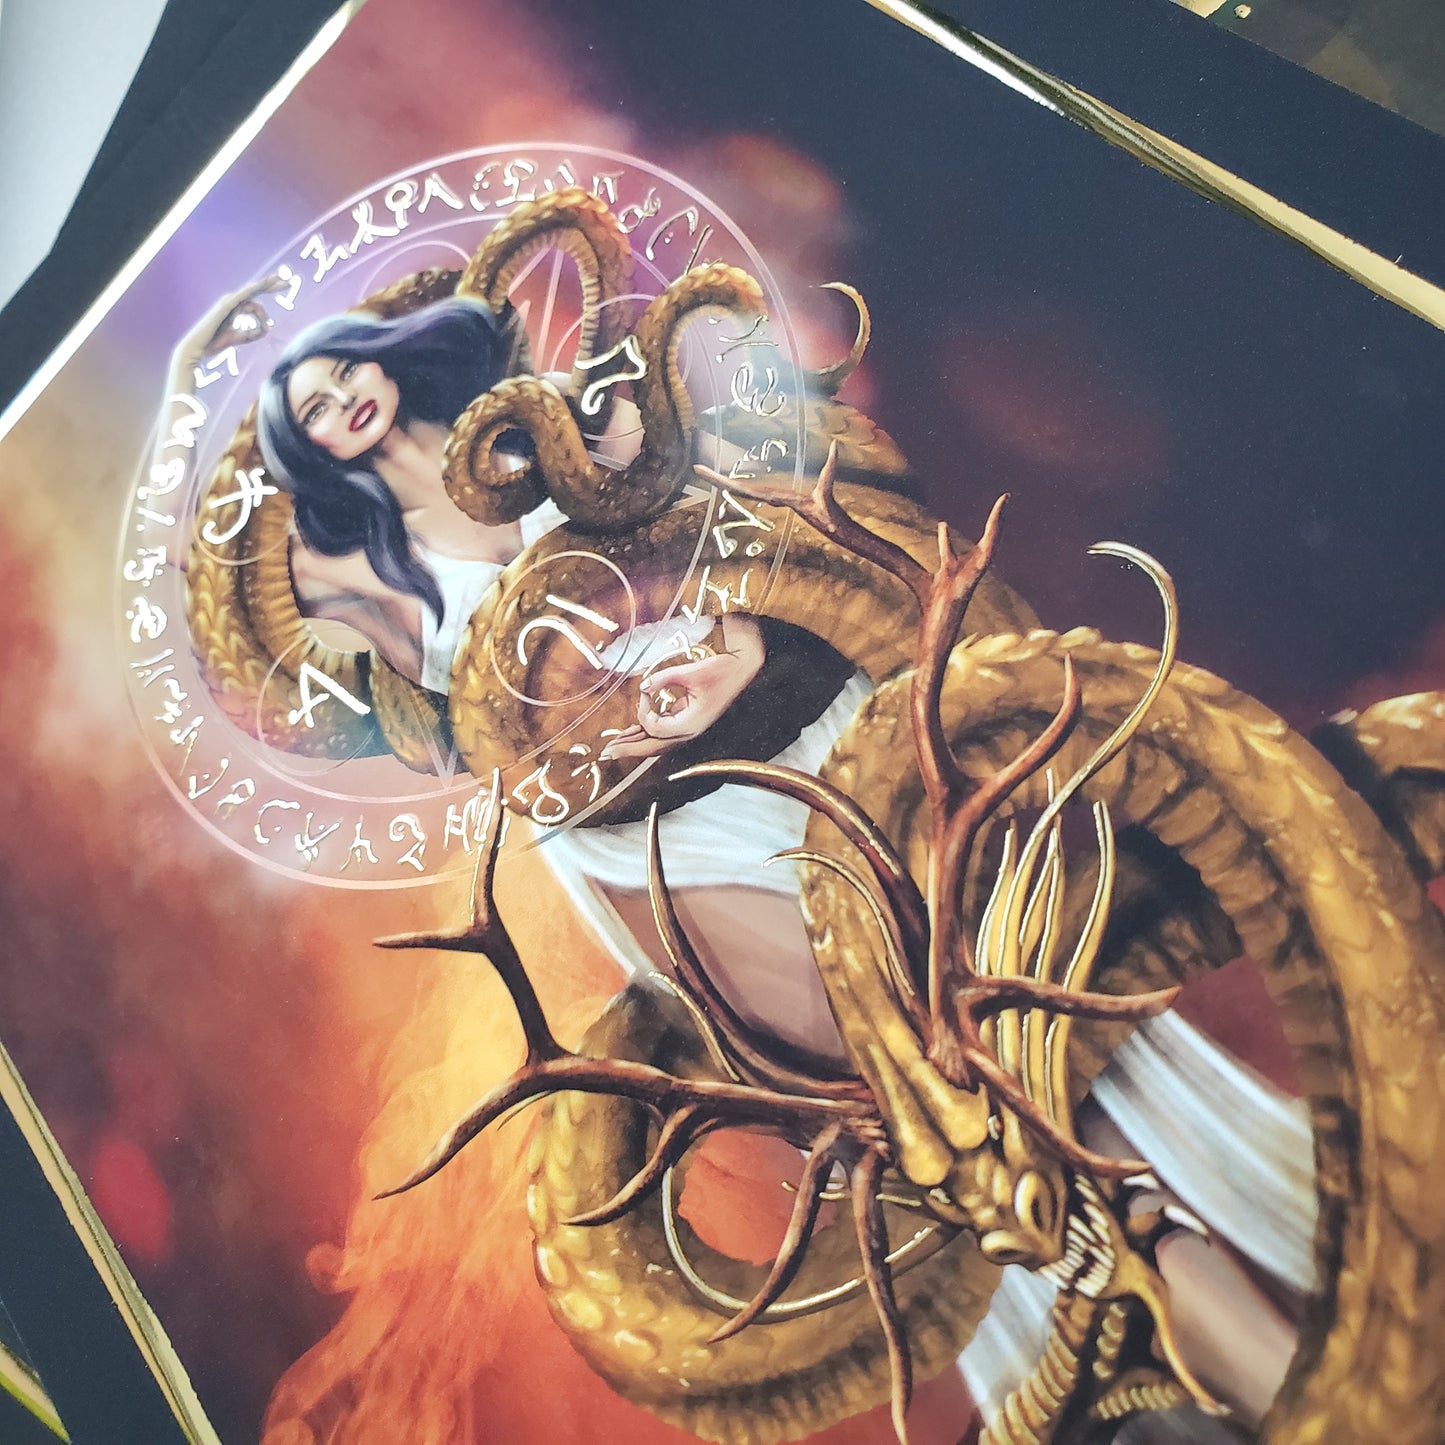 Gold Foil Dragon Priestess Print (limited edition/signed)